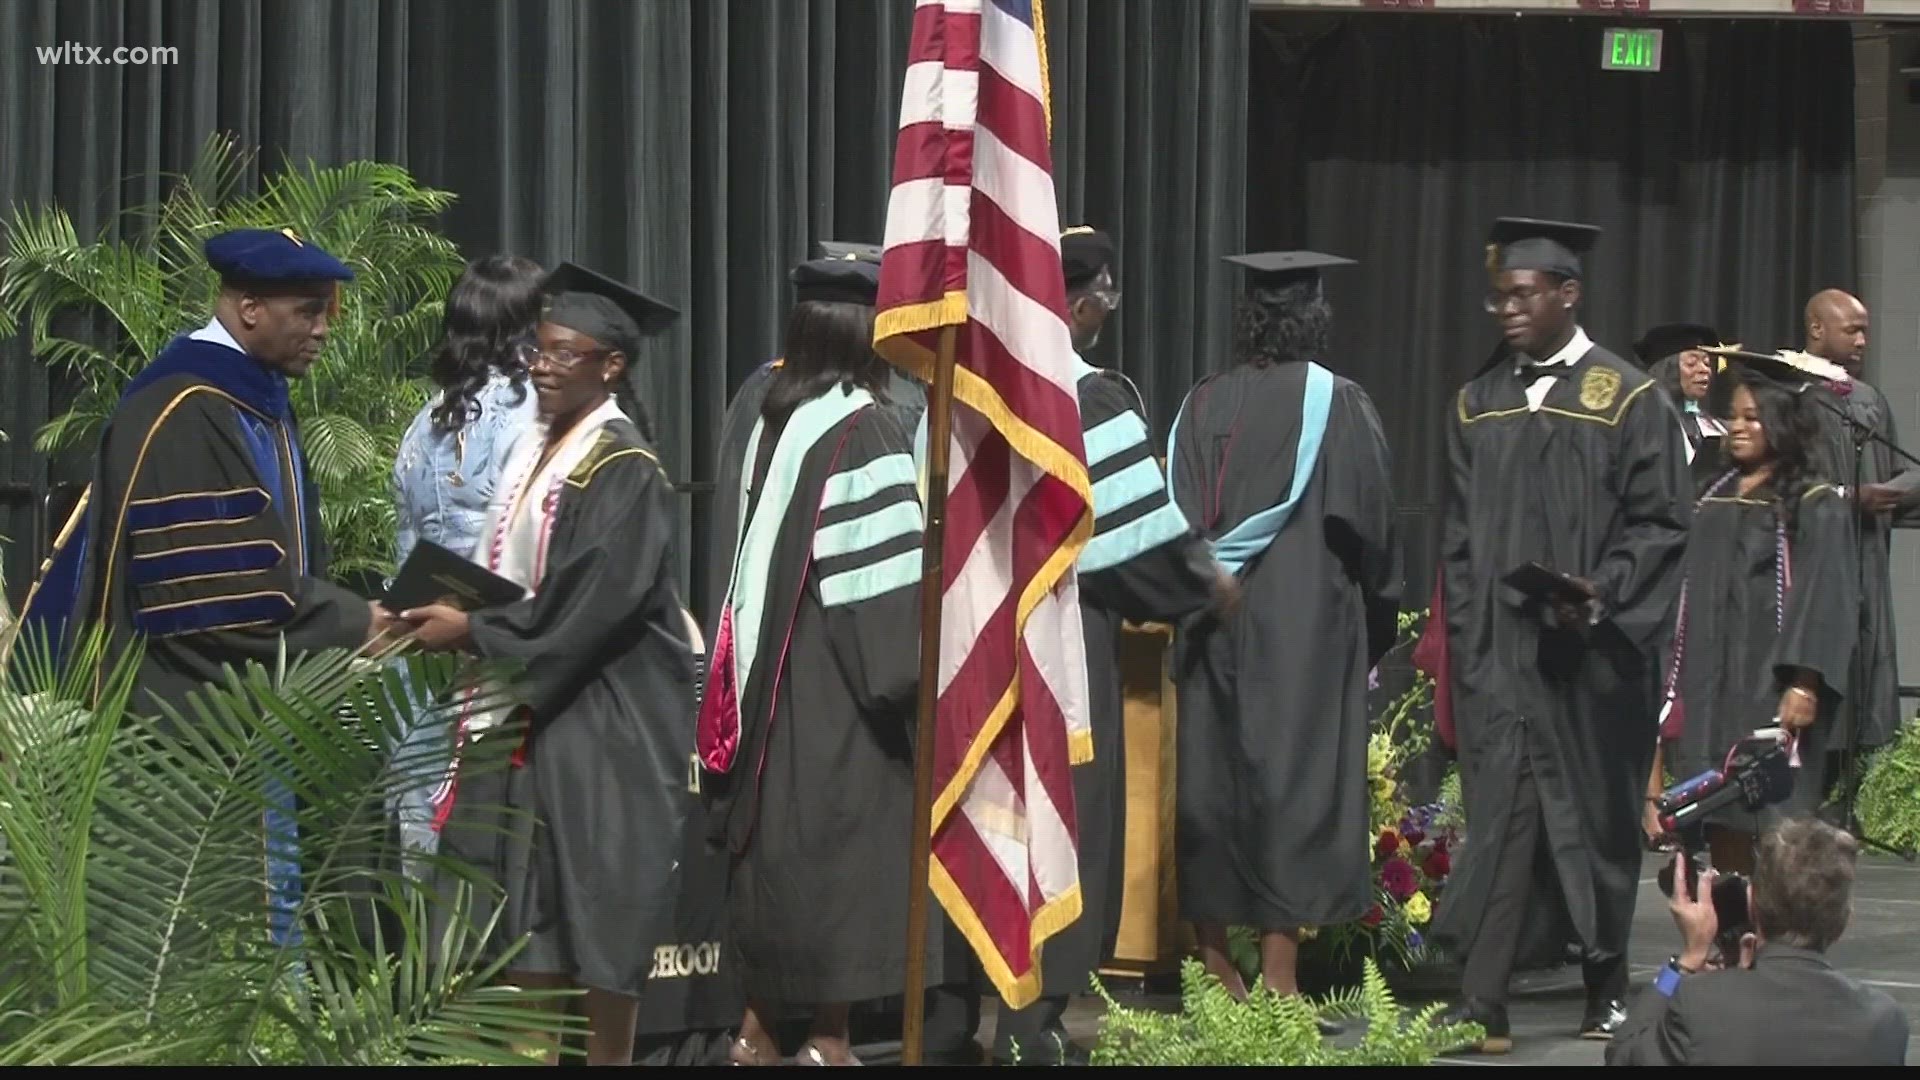 On Wednesday, AC Flora and Lower Richland High School seniors walked across the stage at the Colonial Life Arena.